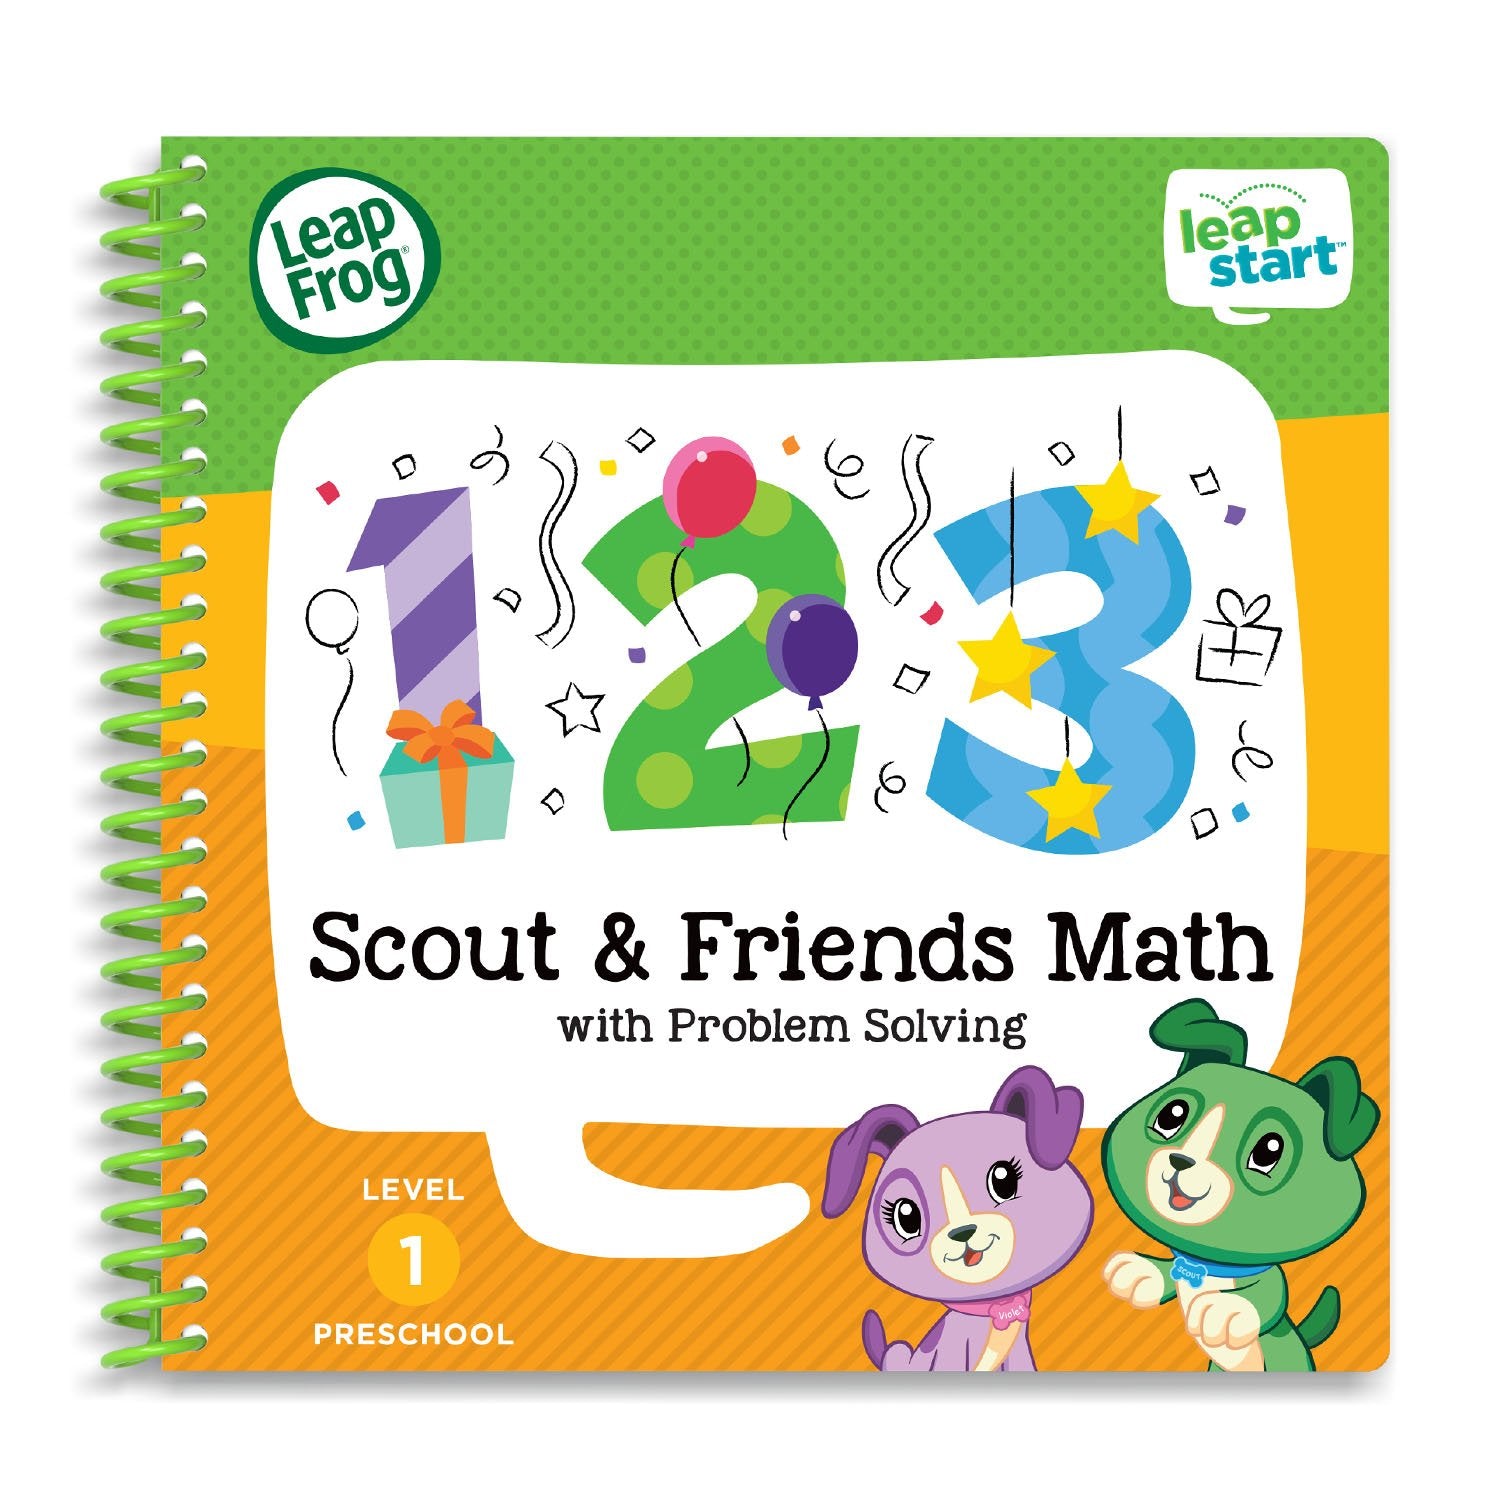 LeapFrog LeapStart Preschool 4-in-1 Activity Book Bundle with ABC, Shapes & Colors, Math, Animals